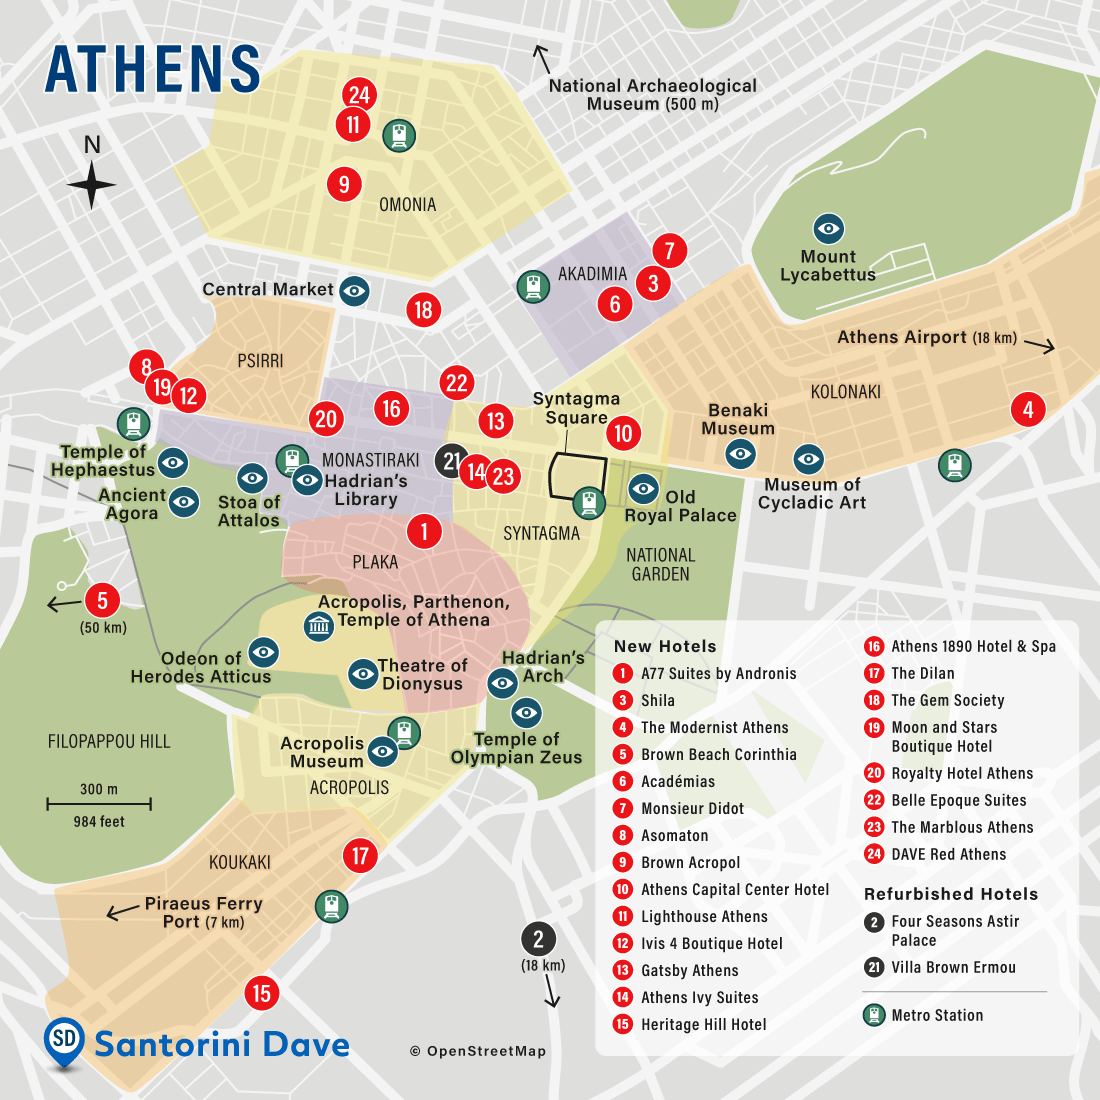 Map showing the locations of the best new and newly-refurbished hotels in Athens, Greece